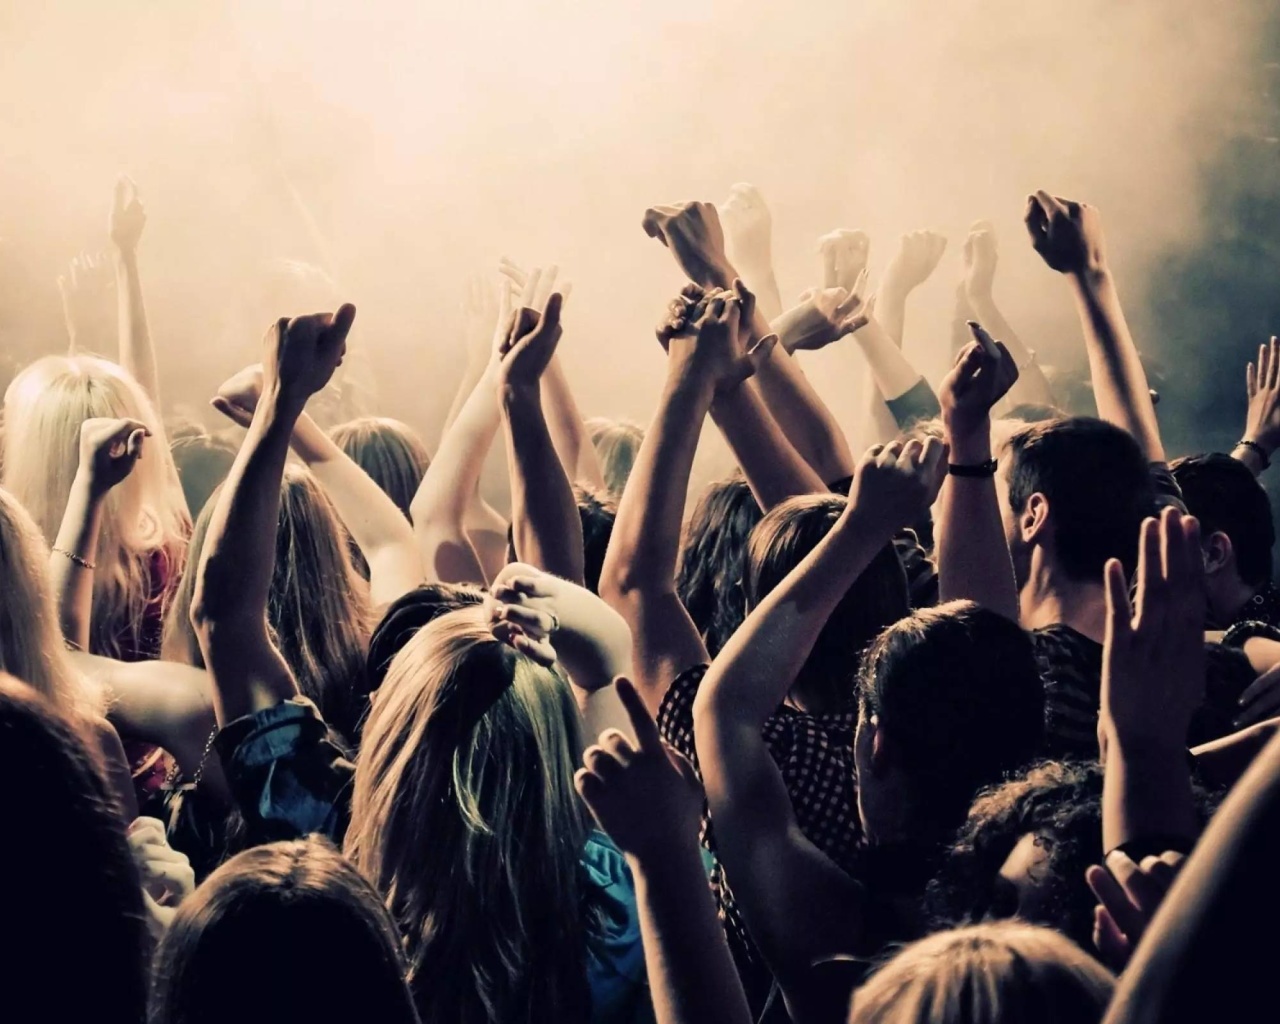 Crazy Party in Night Club, Put your hands up screenshot #1 1280x1024